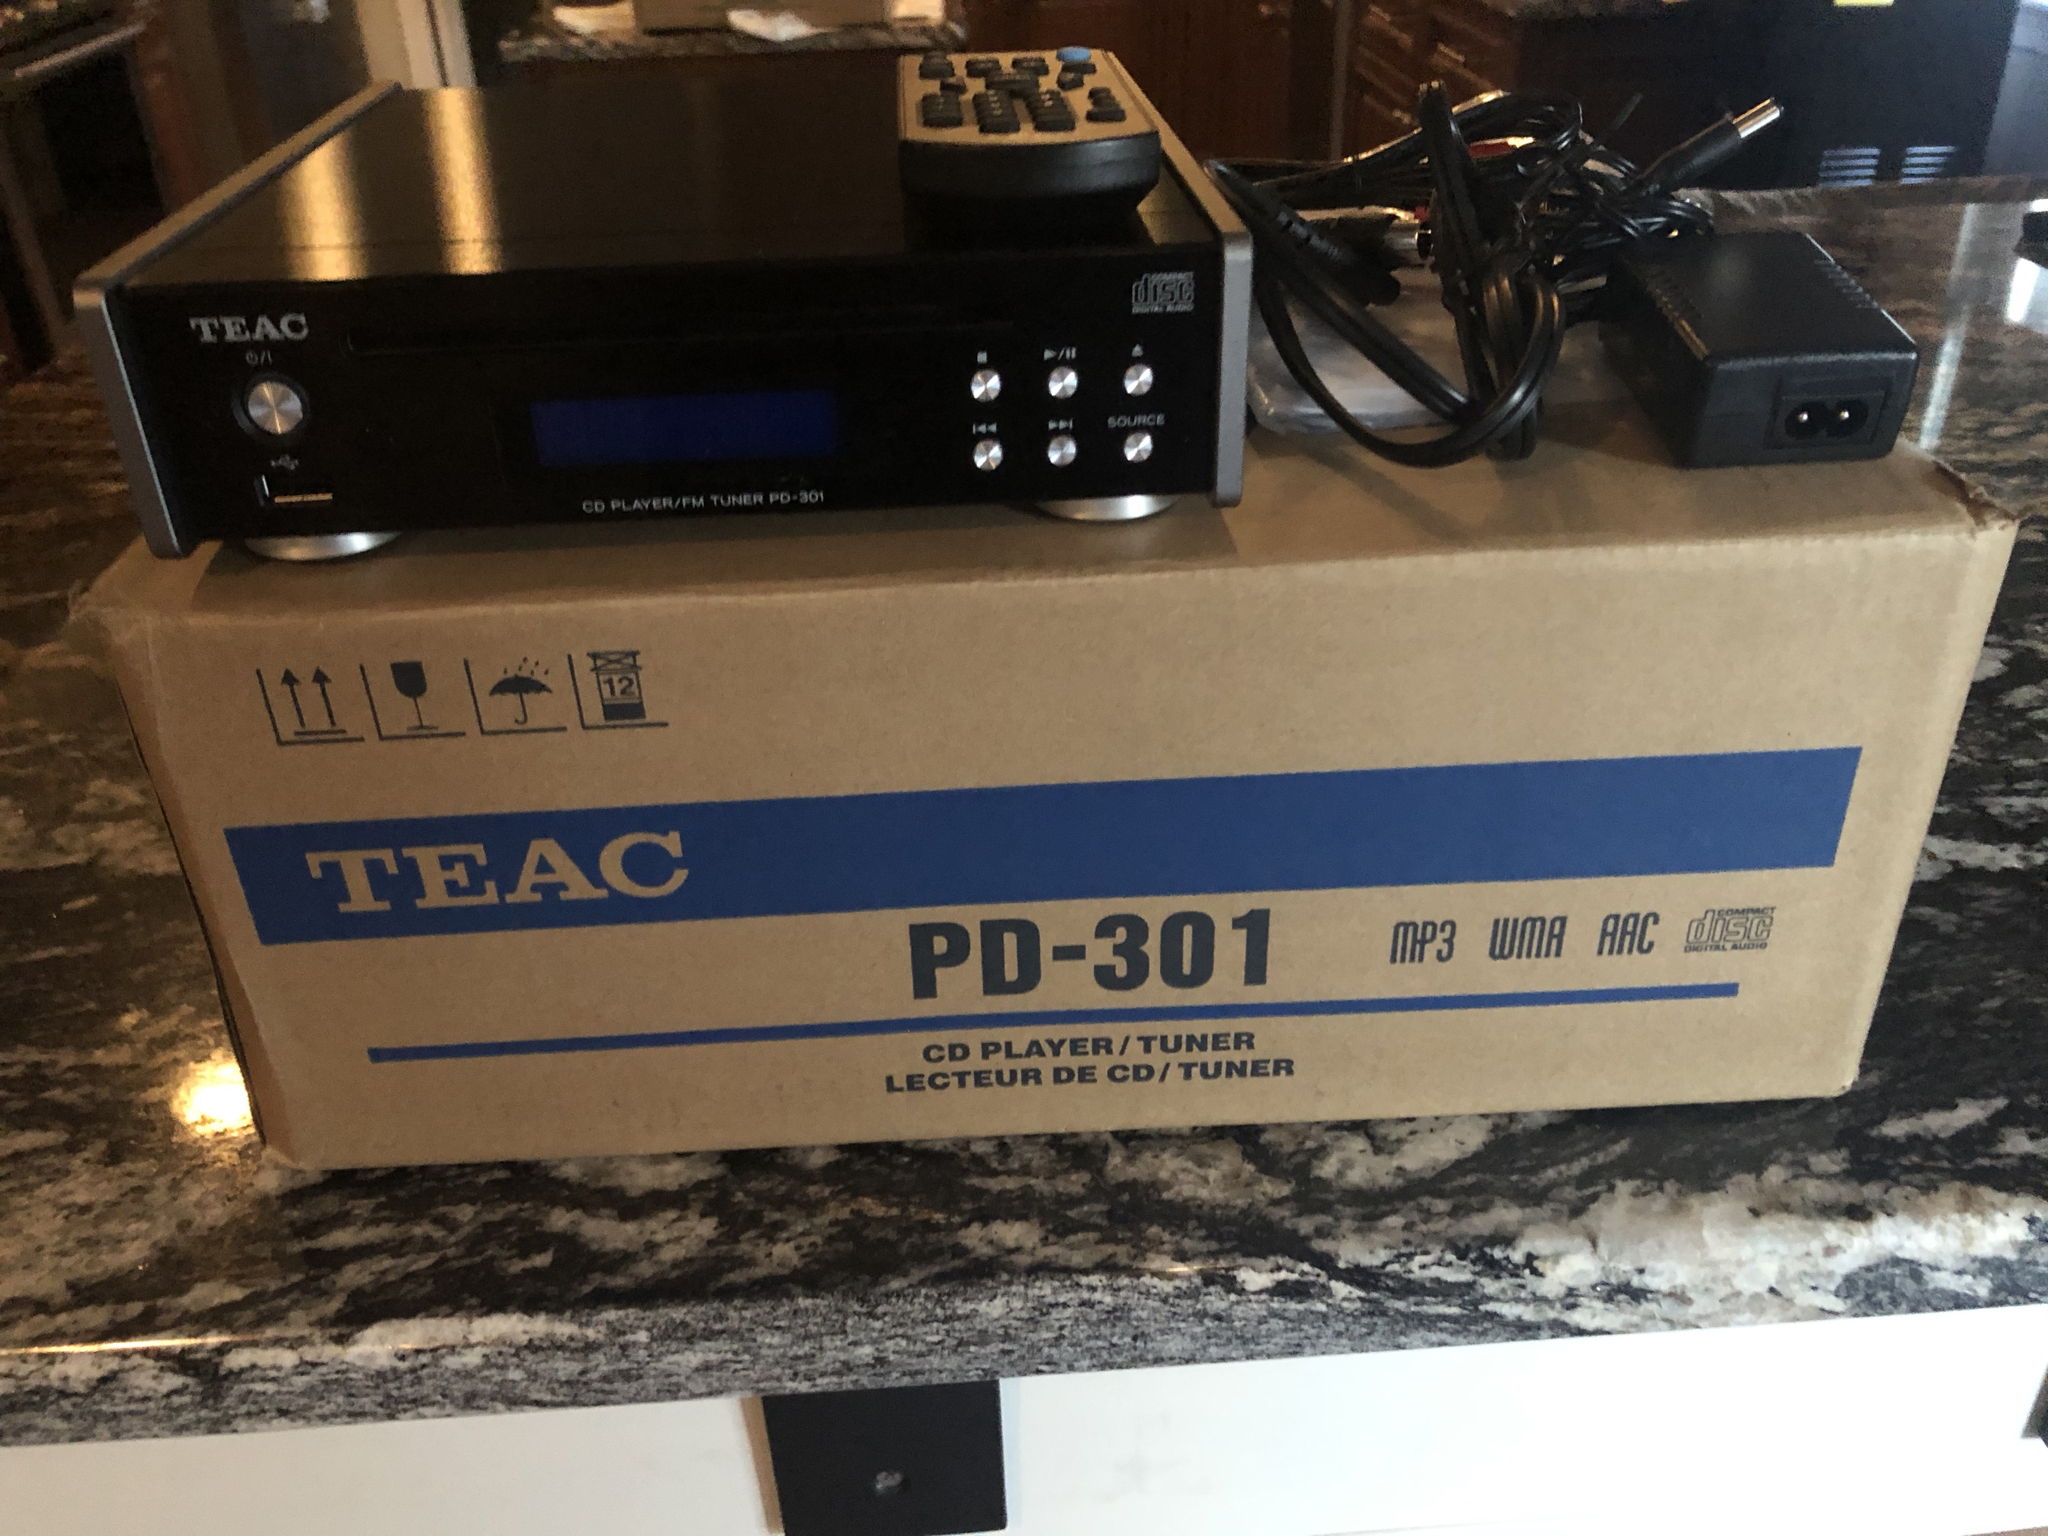 TEAC PD-301CD PLAYER / TUNER / EXCELLENT!!! For Sale | Audiogon